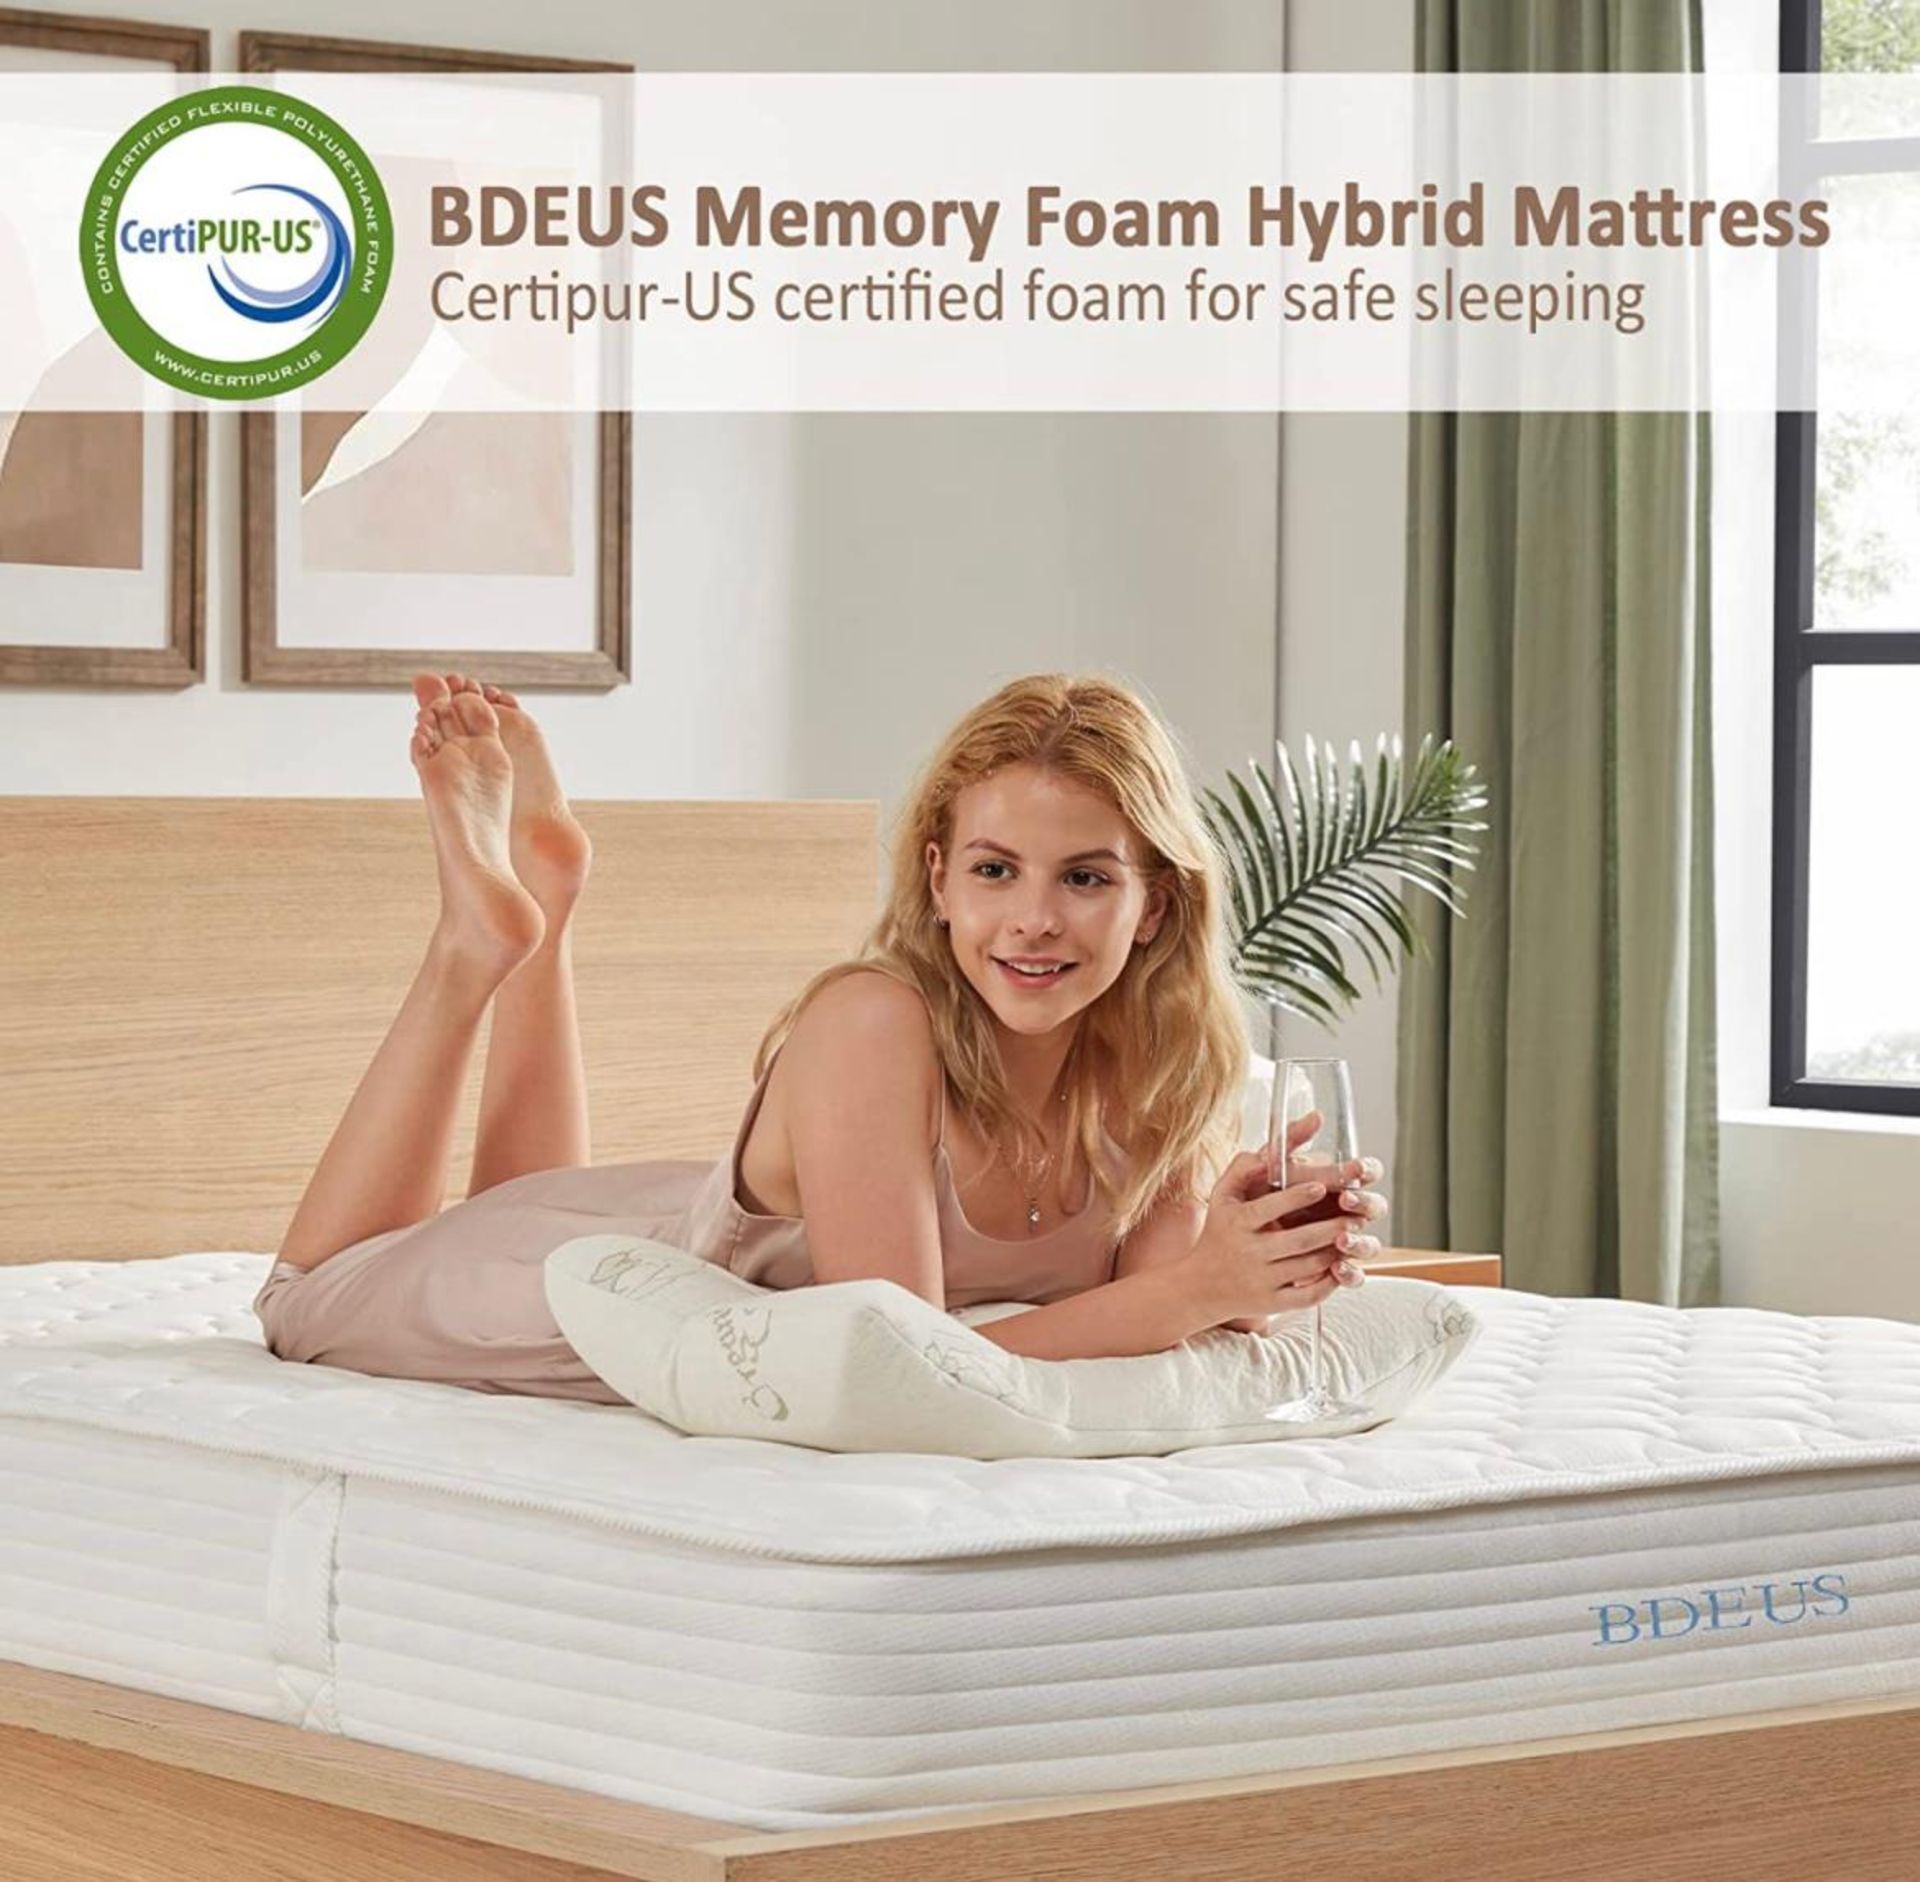 NEW 3FT SINGLE ROLLED MEMORY FOAM HYBRID MATTRESS - MAINLAND UK DELIVERY AVAILABLE FOR £20.